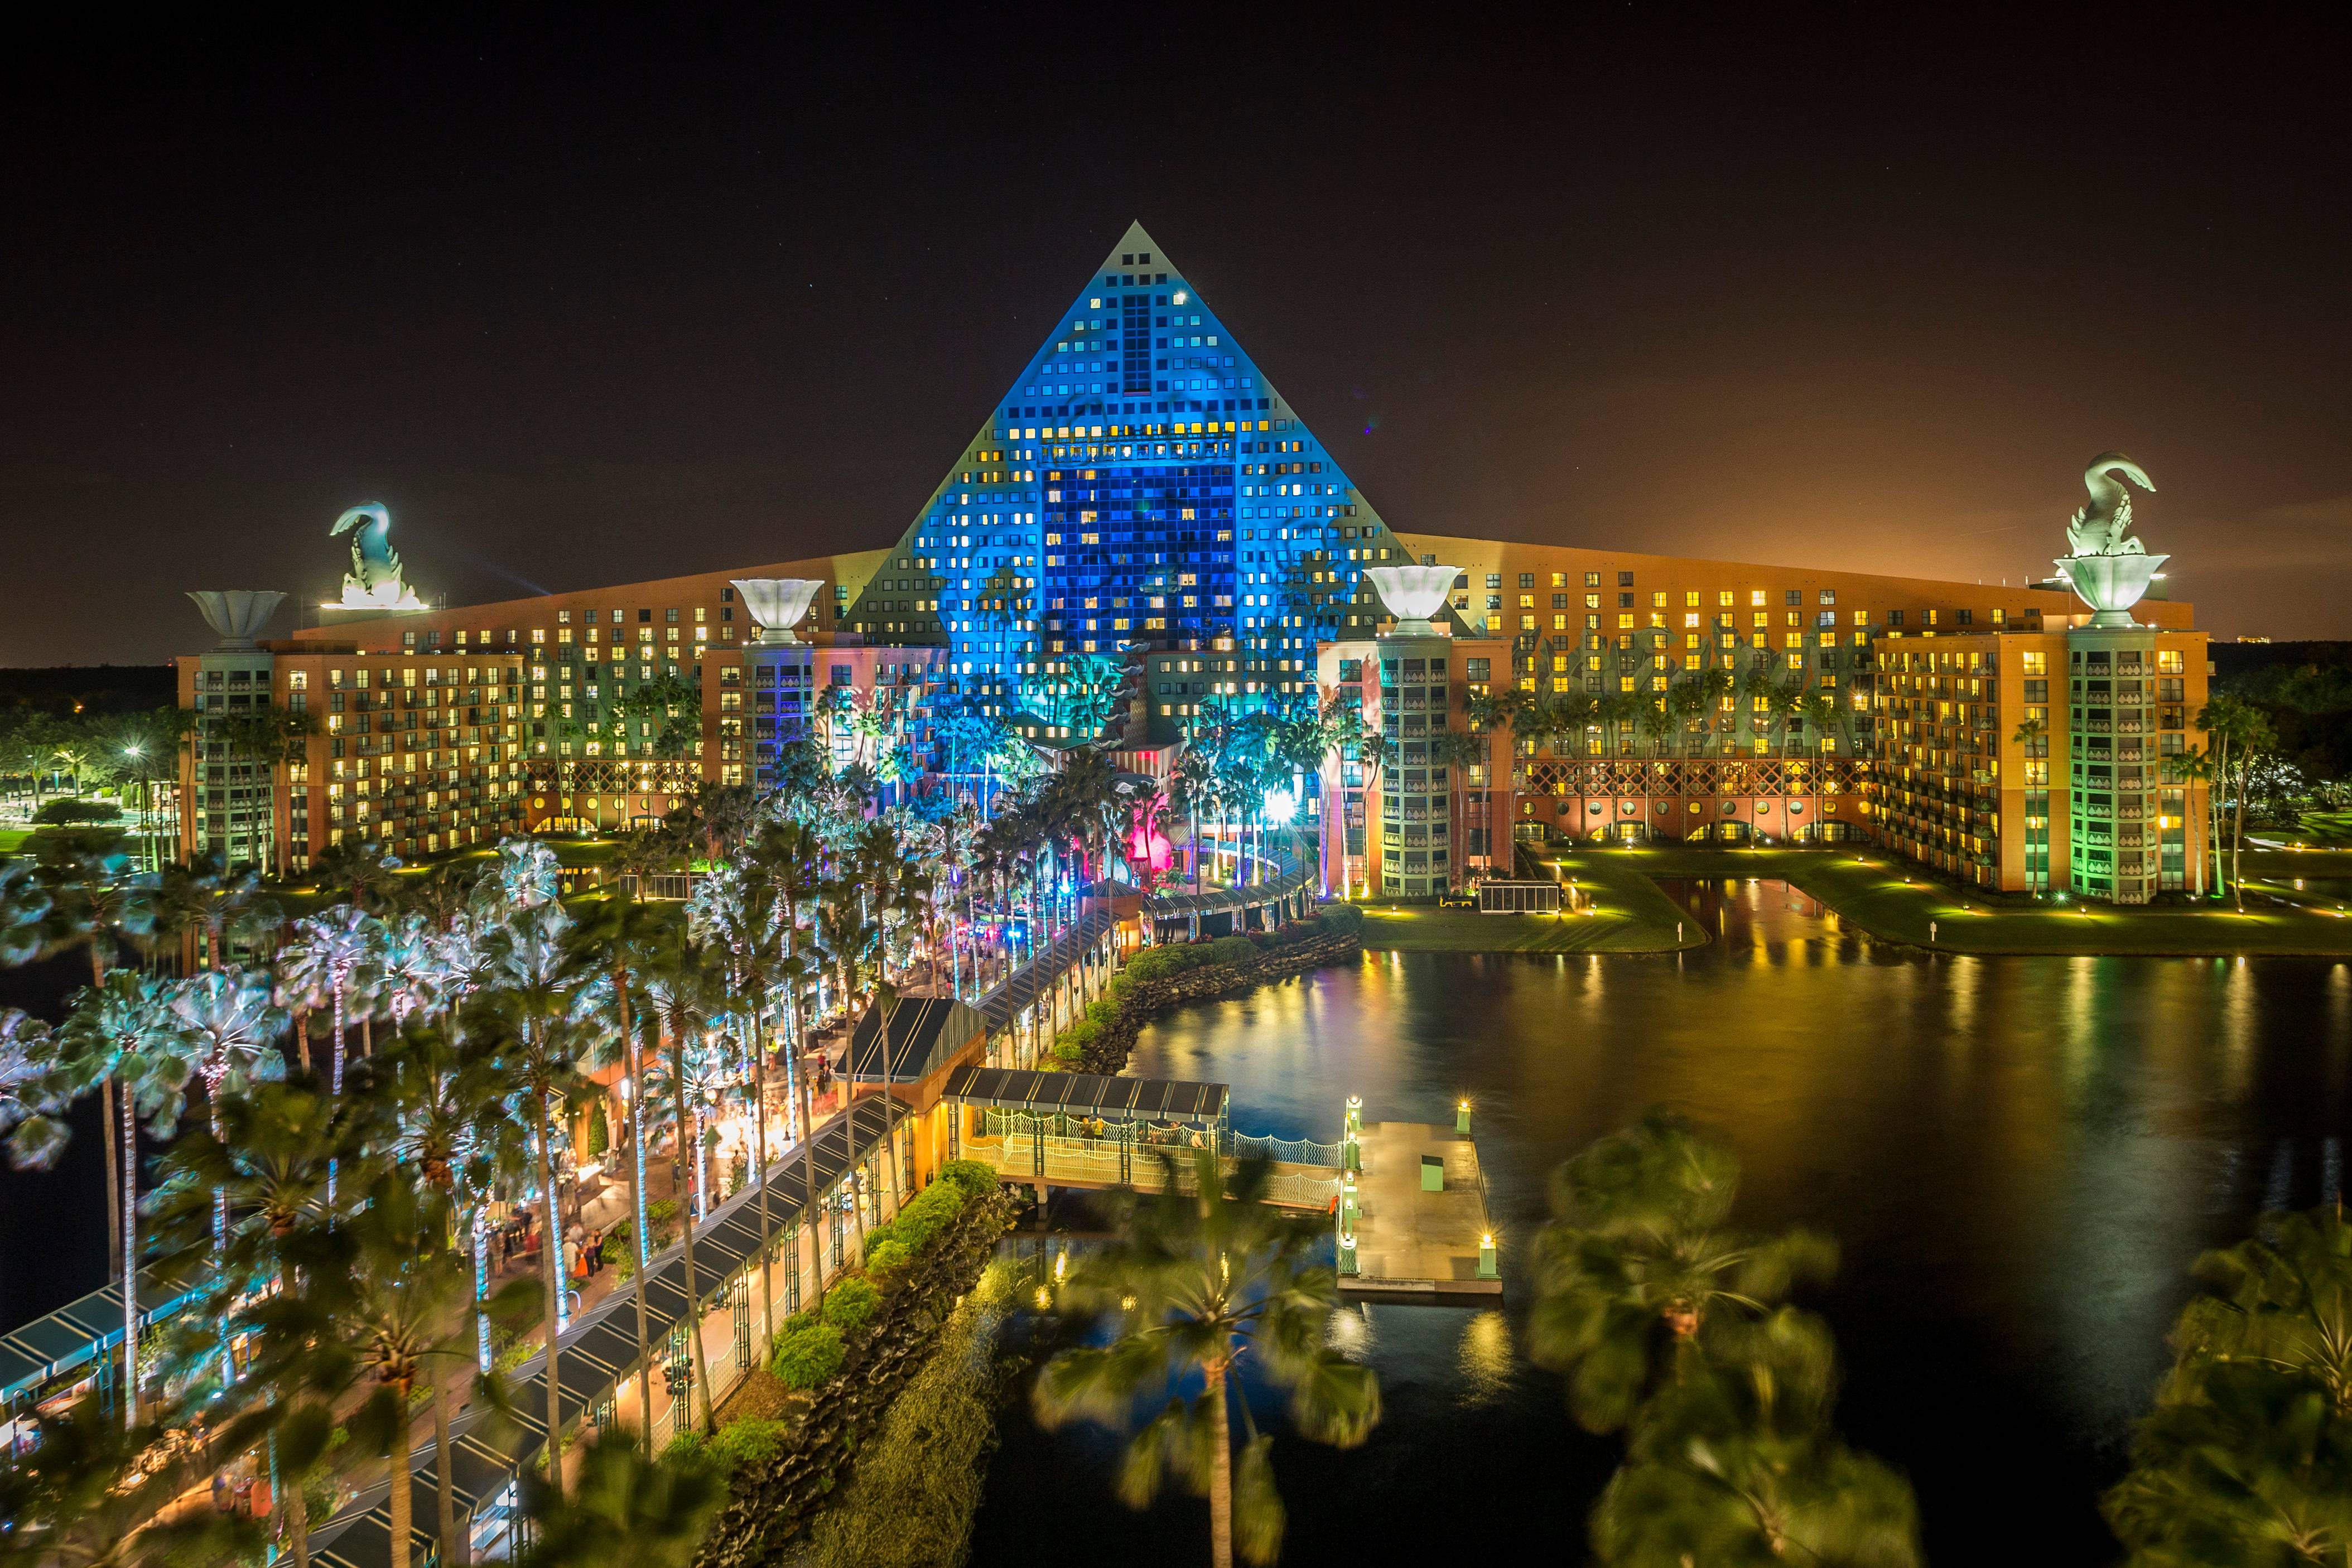 The Walt Disney World Swan and Dolphin Food and Wine Classic returns for its 5th year